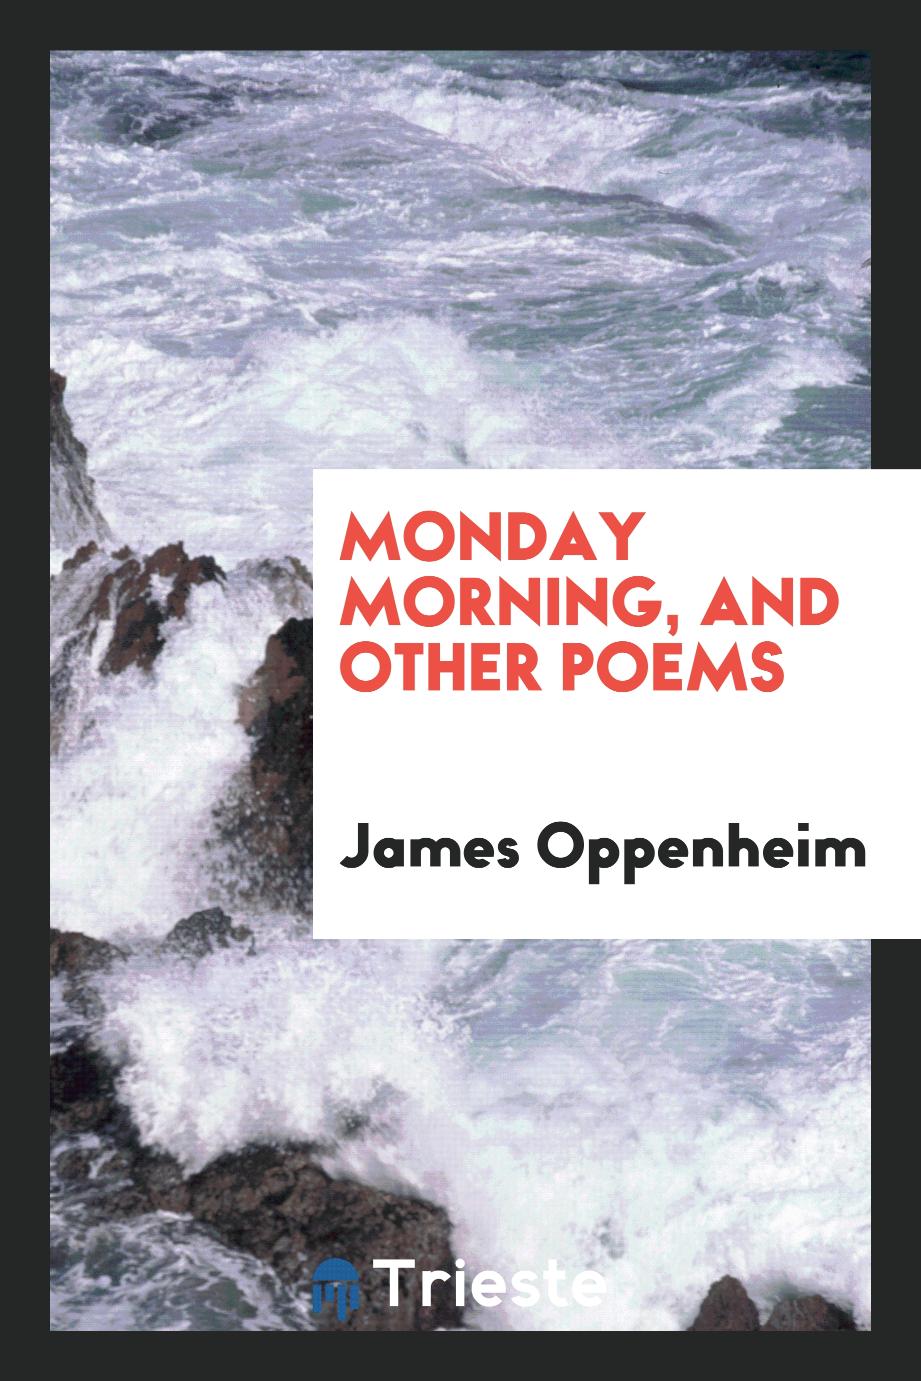 Monday Morning, and Other Poems